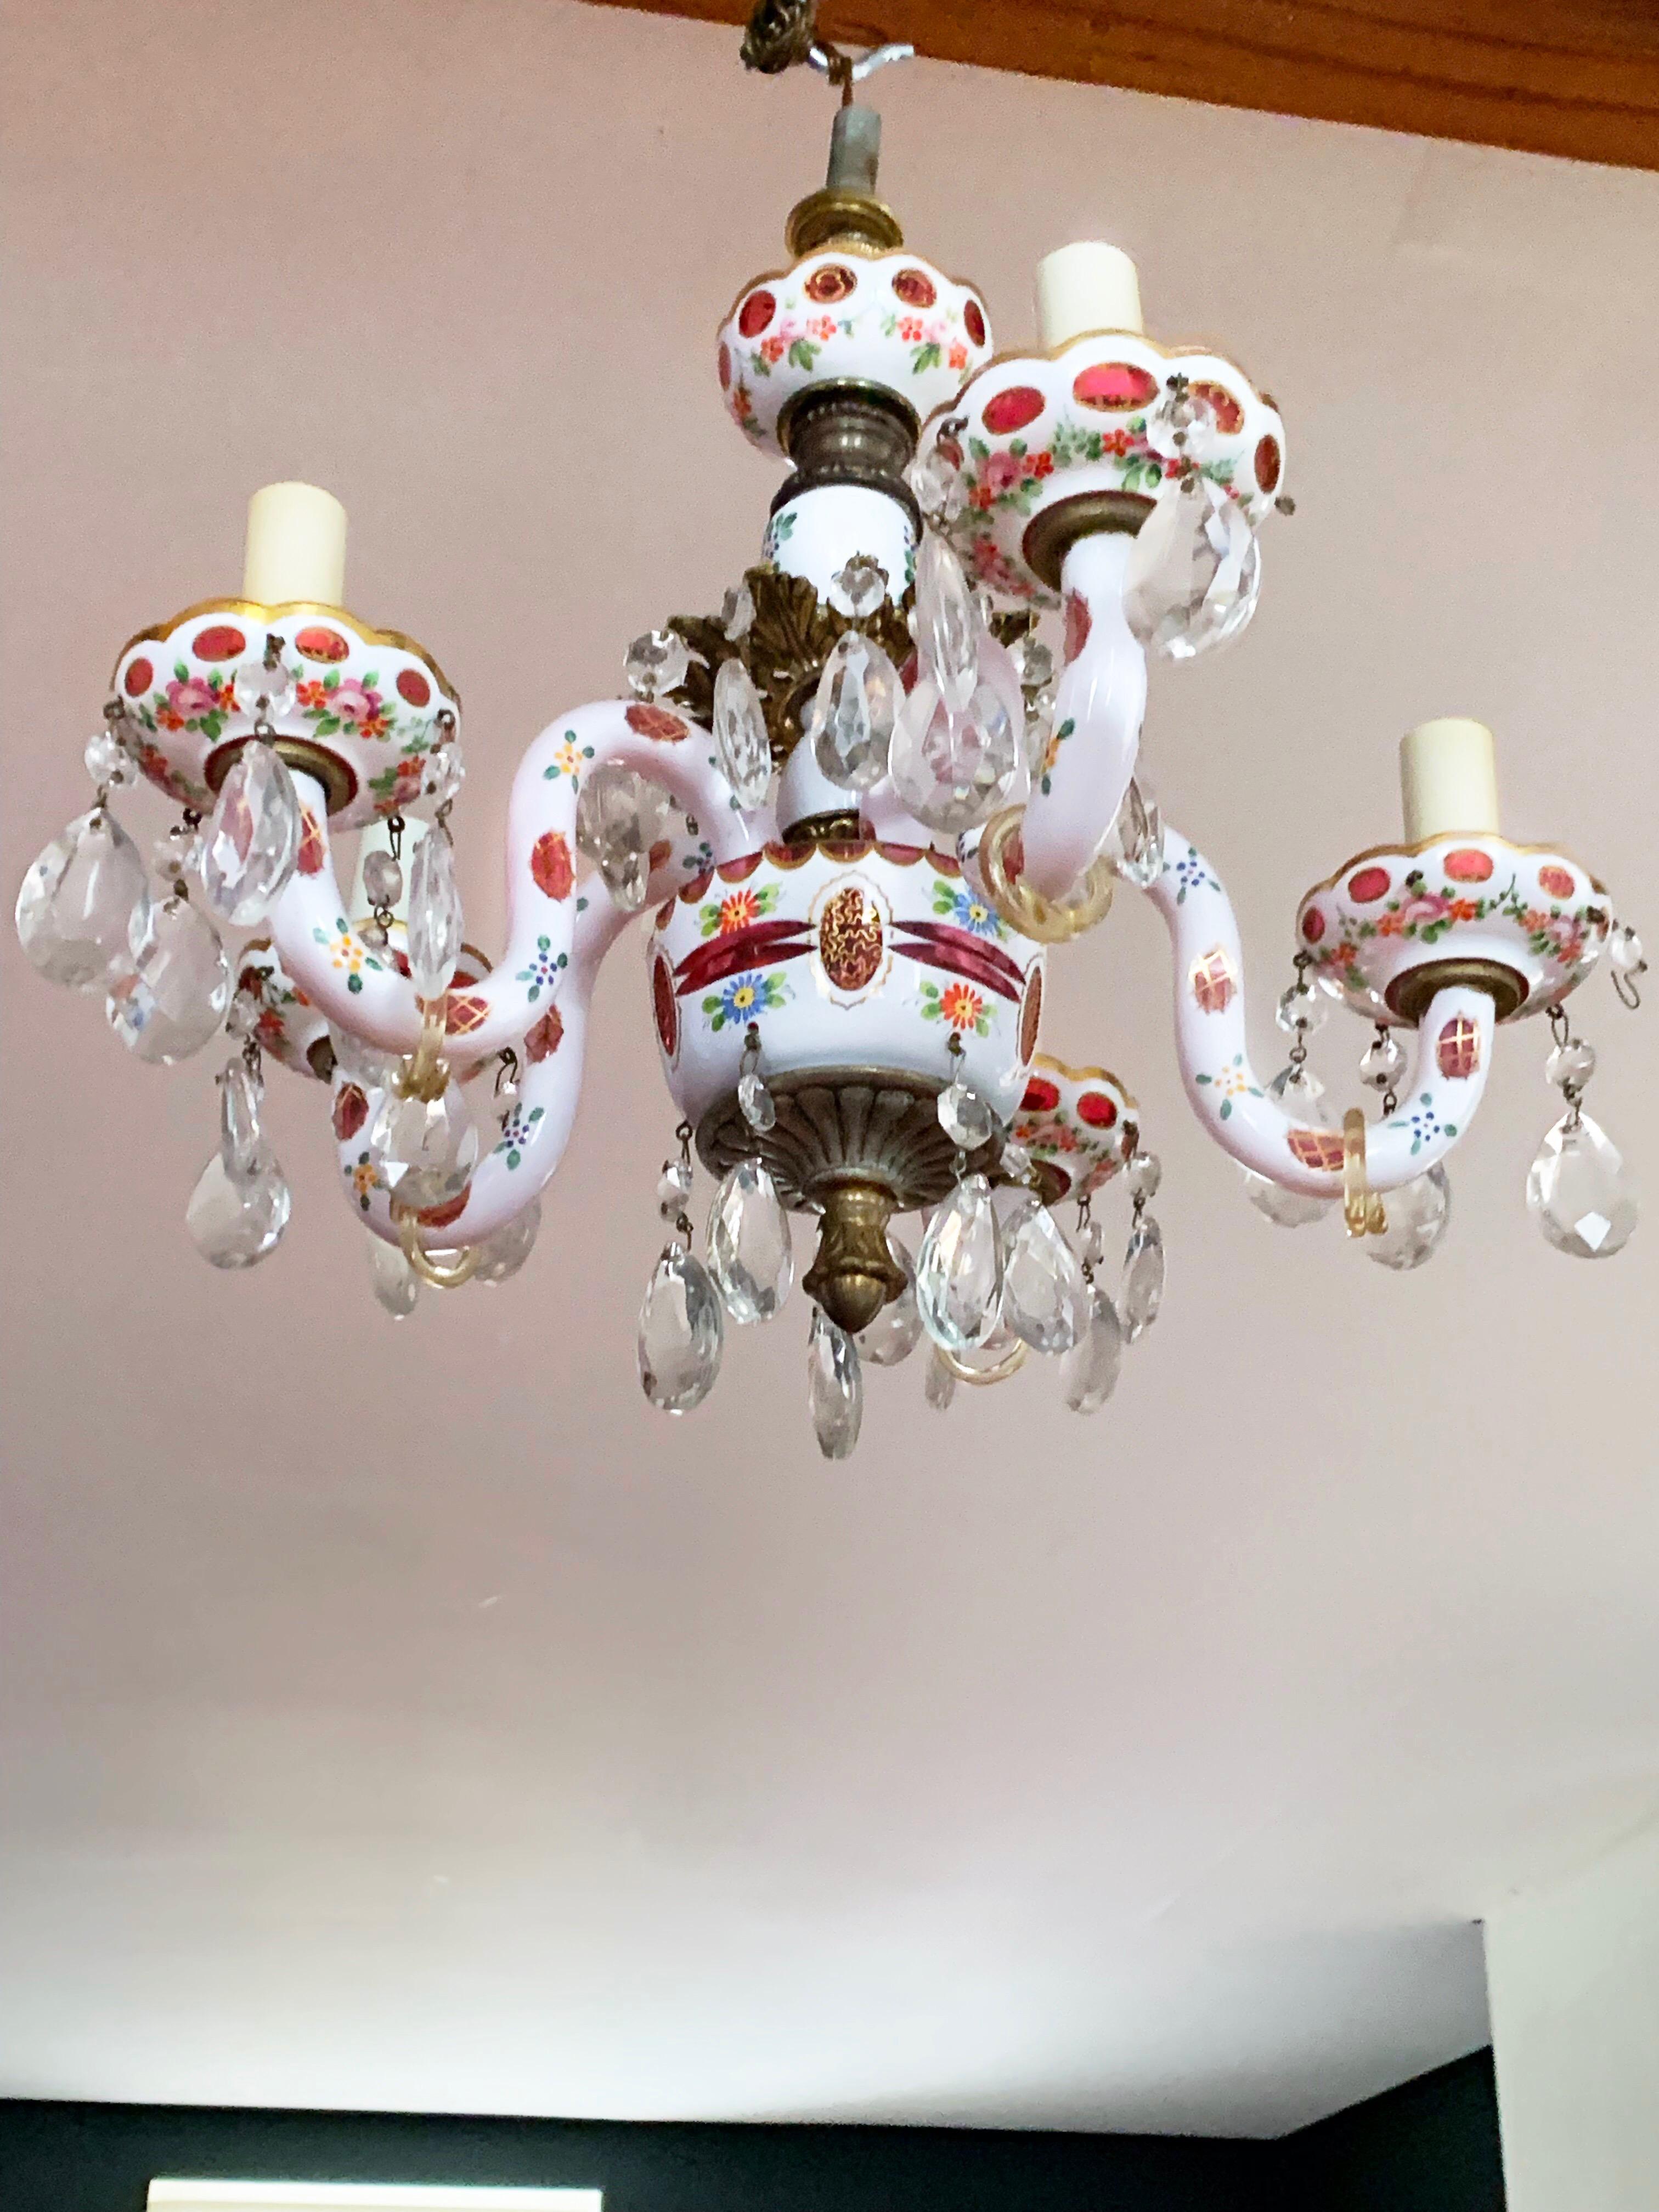 Gorgeous diminutive continental Bavarian porcelain 5-armed chandelier with cranberry glass accents and gilding. Retains original price tag from midcentury lighting dealer, 1250 USD. Somewhere in the 1960s, the crystals were swapped out with lighter,